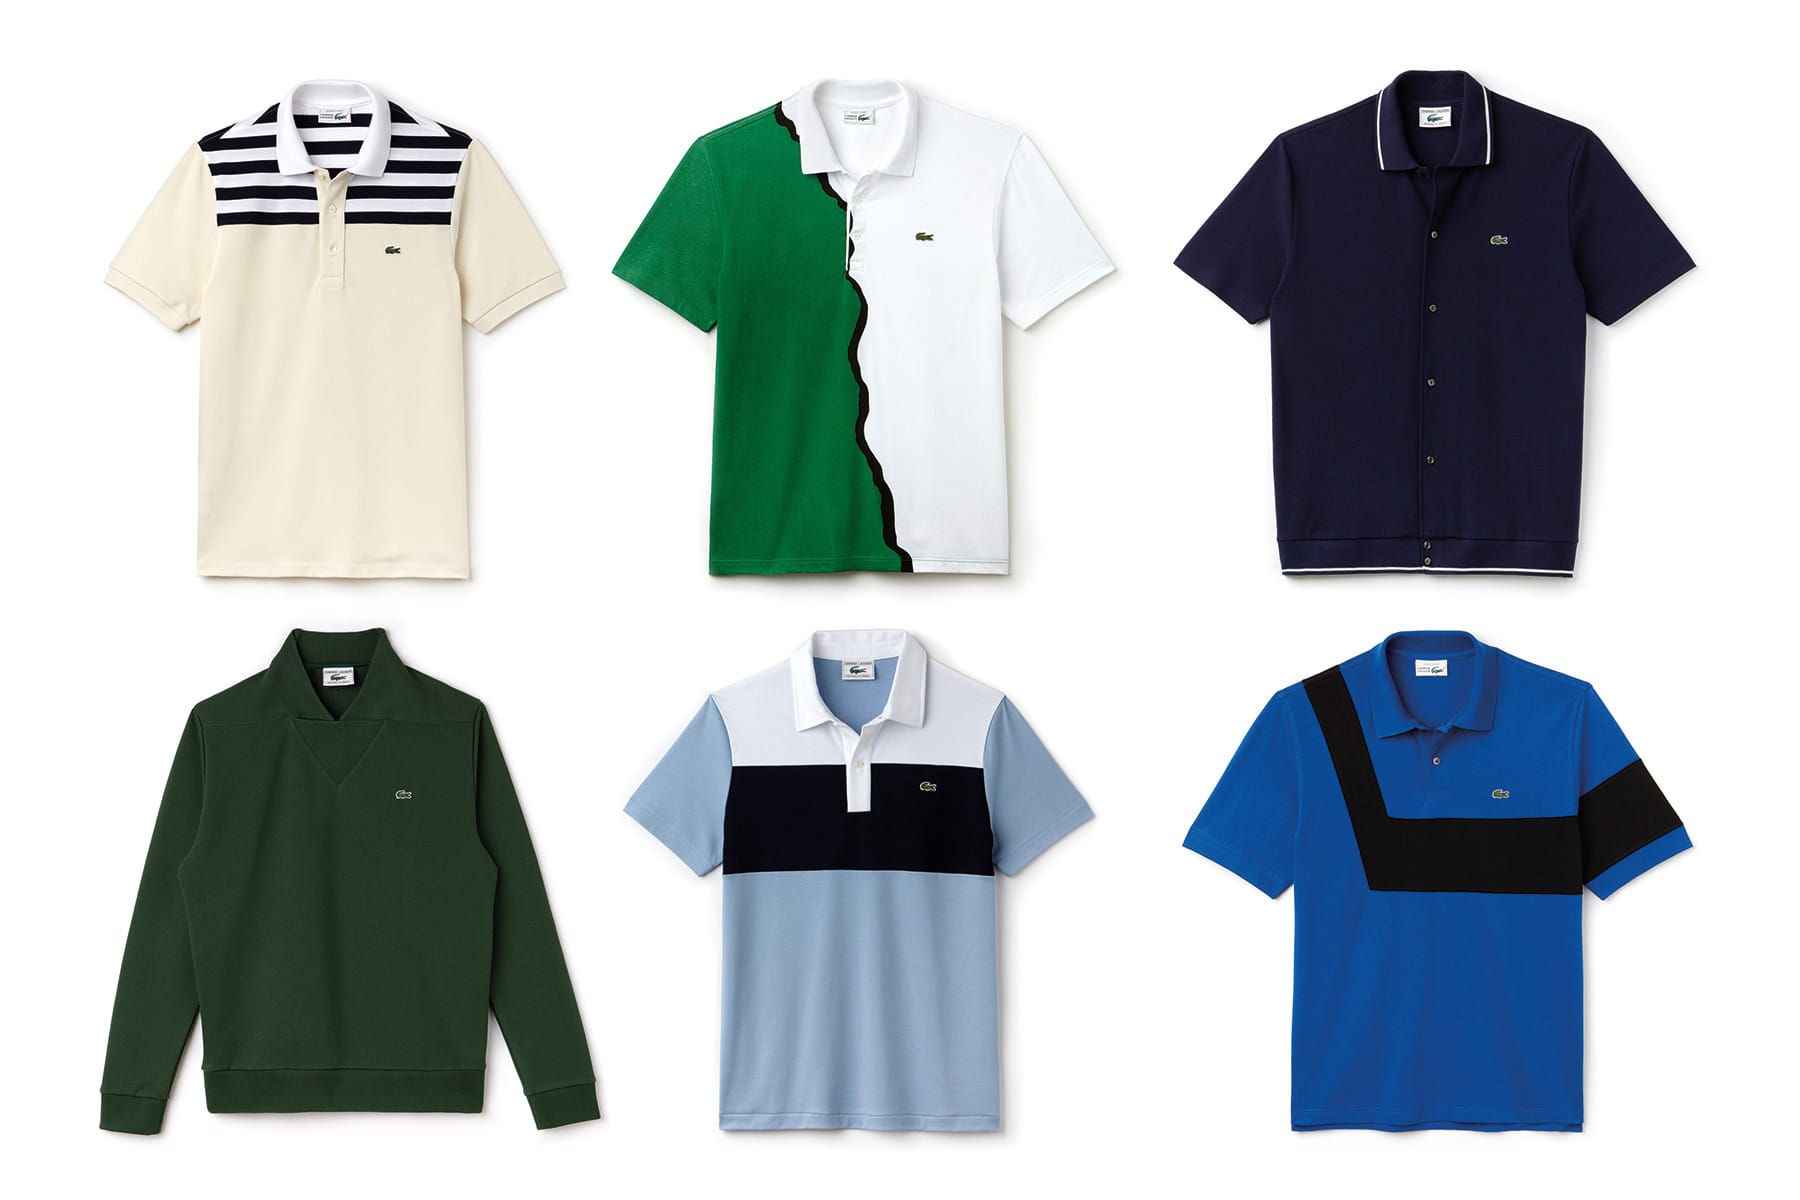 lacoste limited edition polo shirt 2018